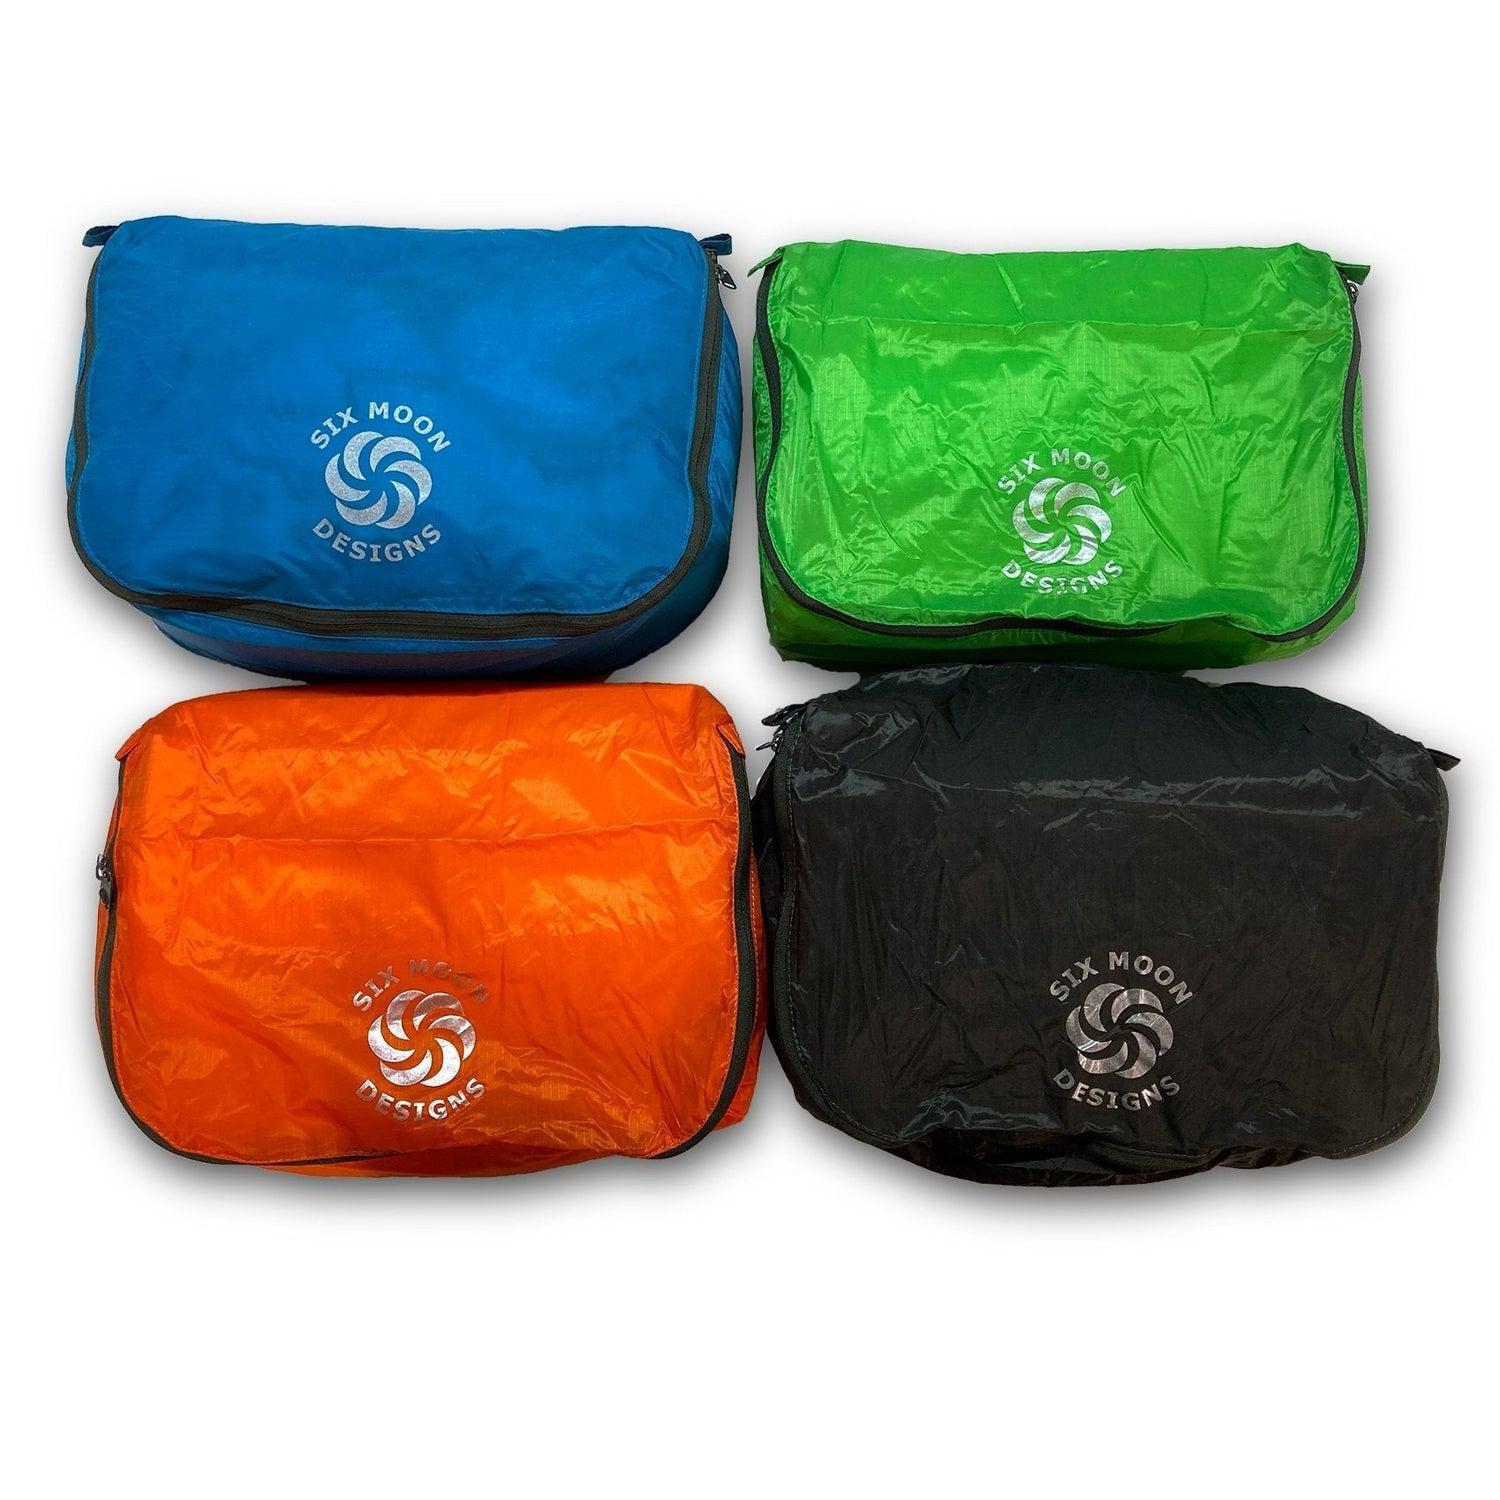 Six Moon Designs Packing Pods 3-pack-Packraft Norge